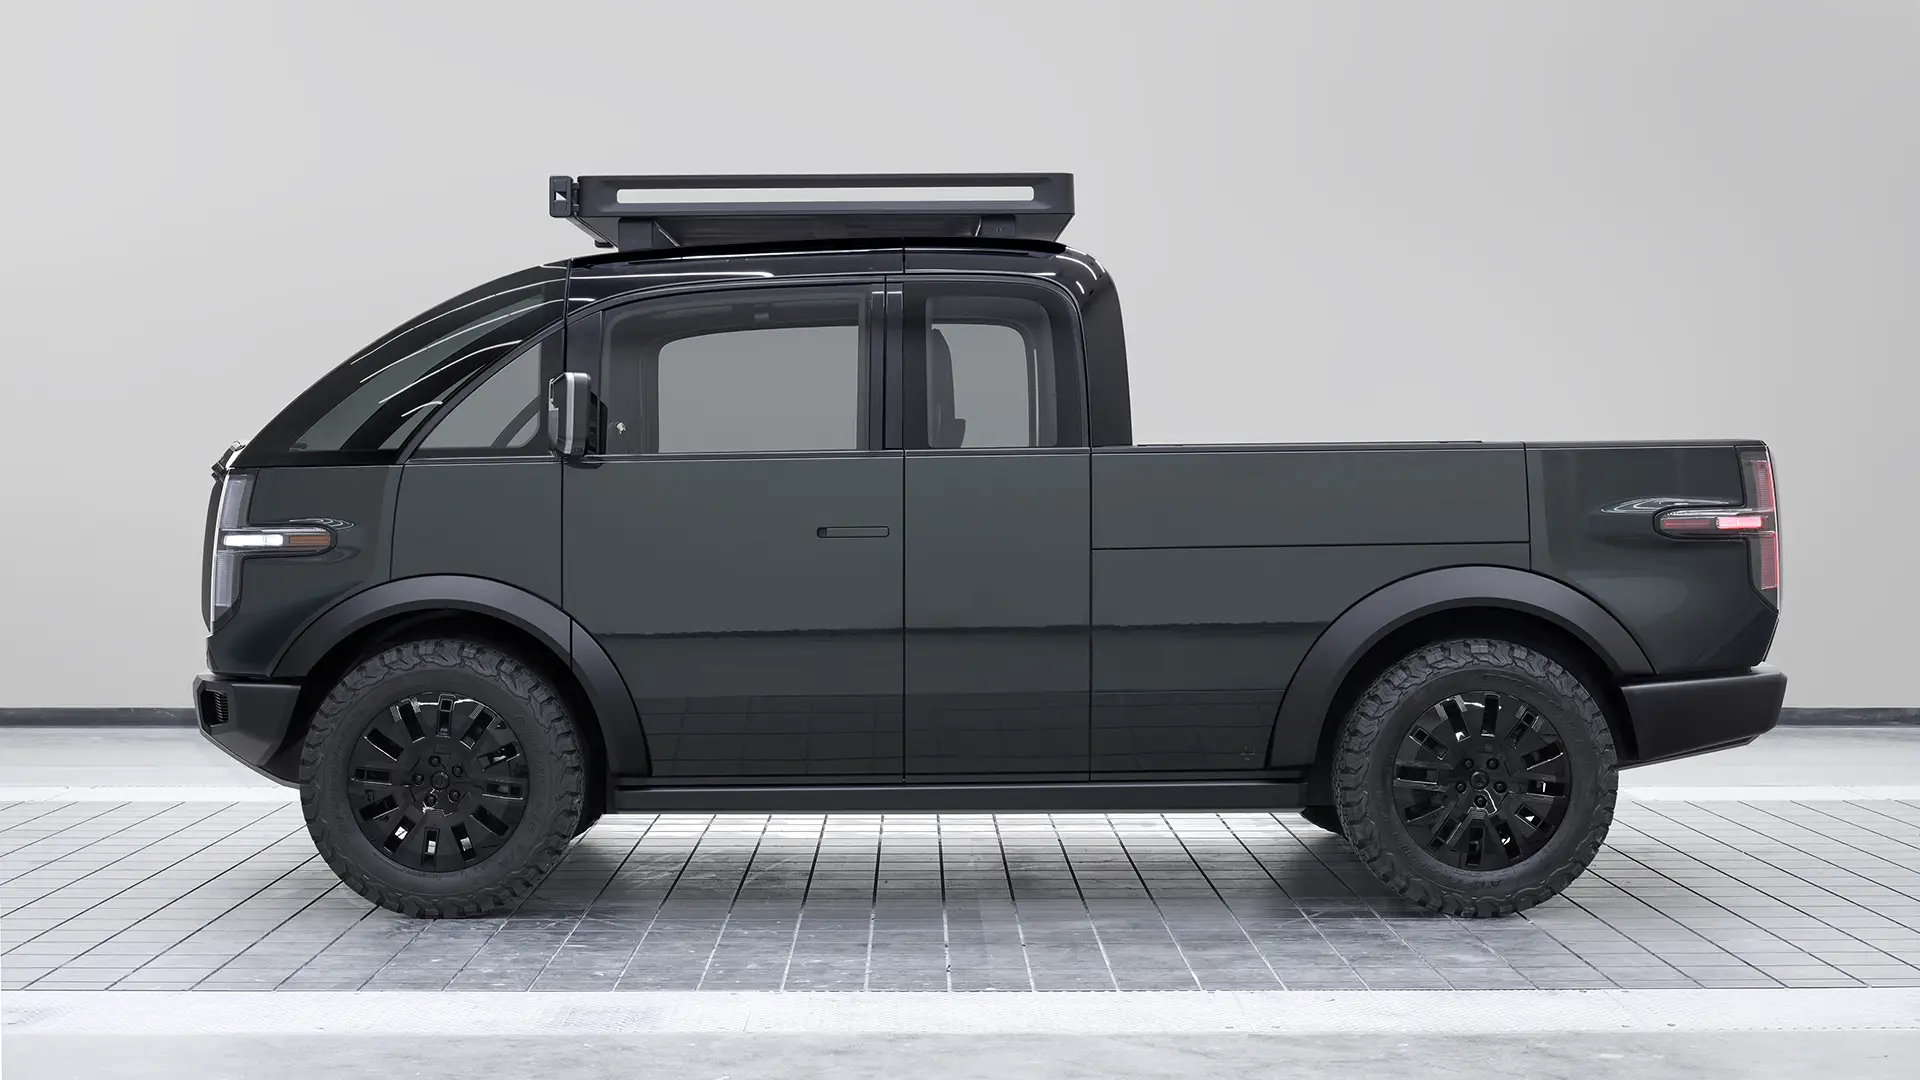 https://e-vehicleinfo.com/global/canoo-electric-pickup-truck-price-range-and-specification/